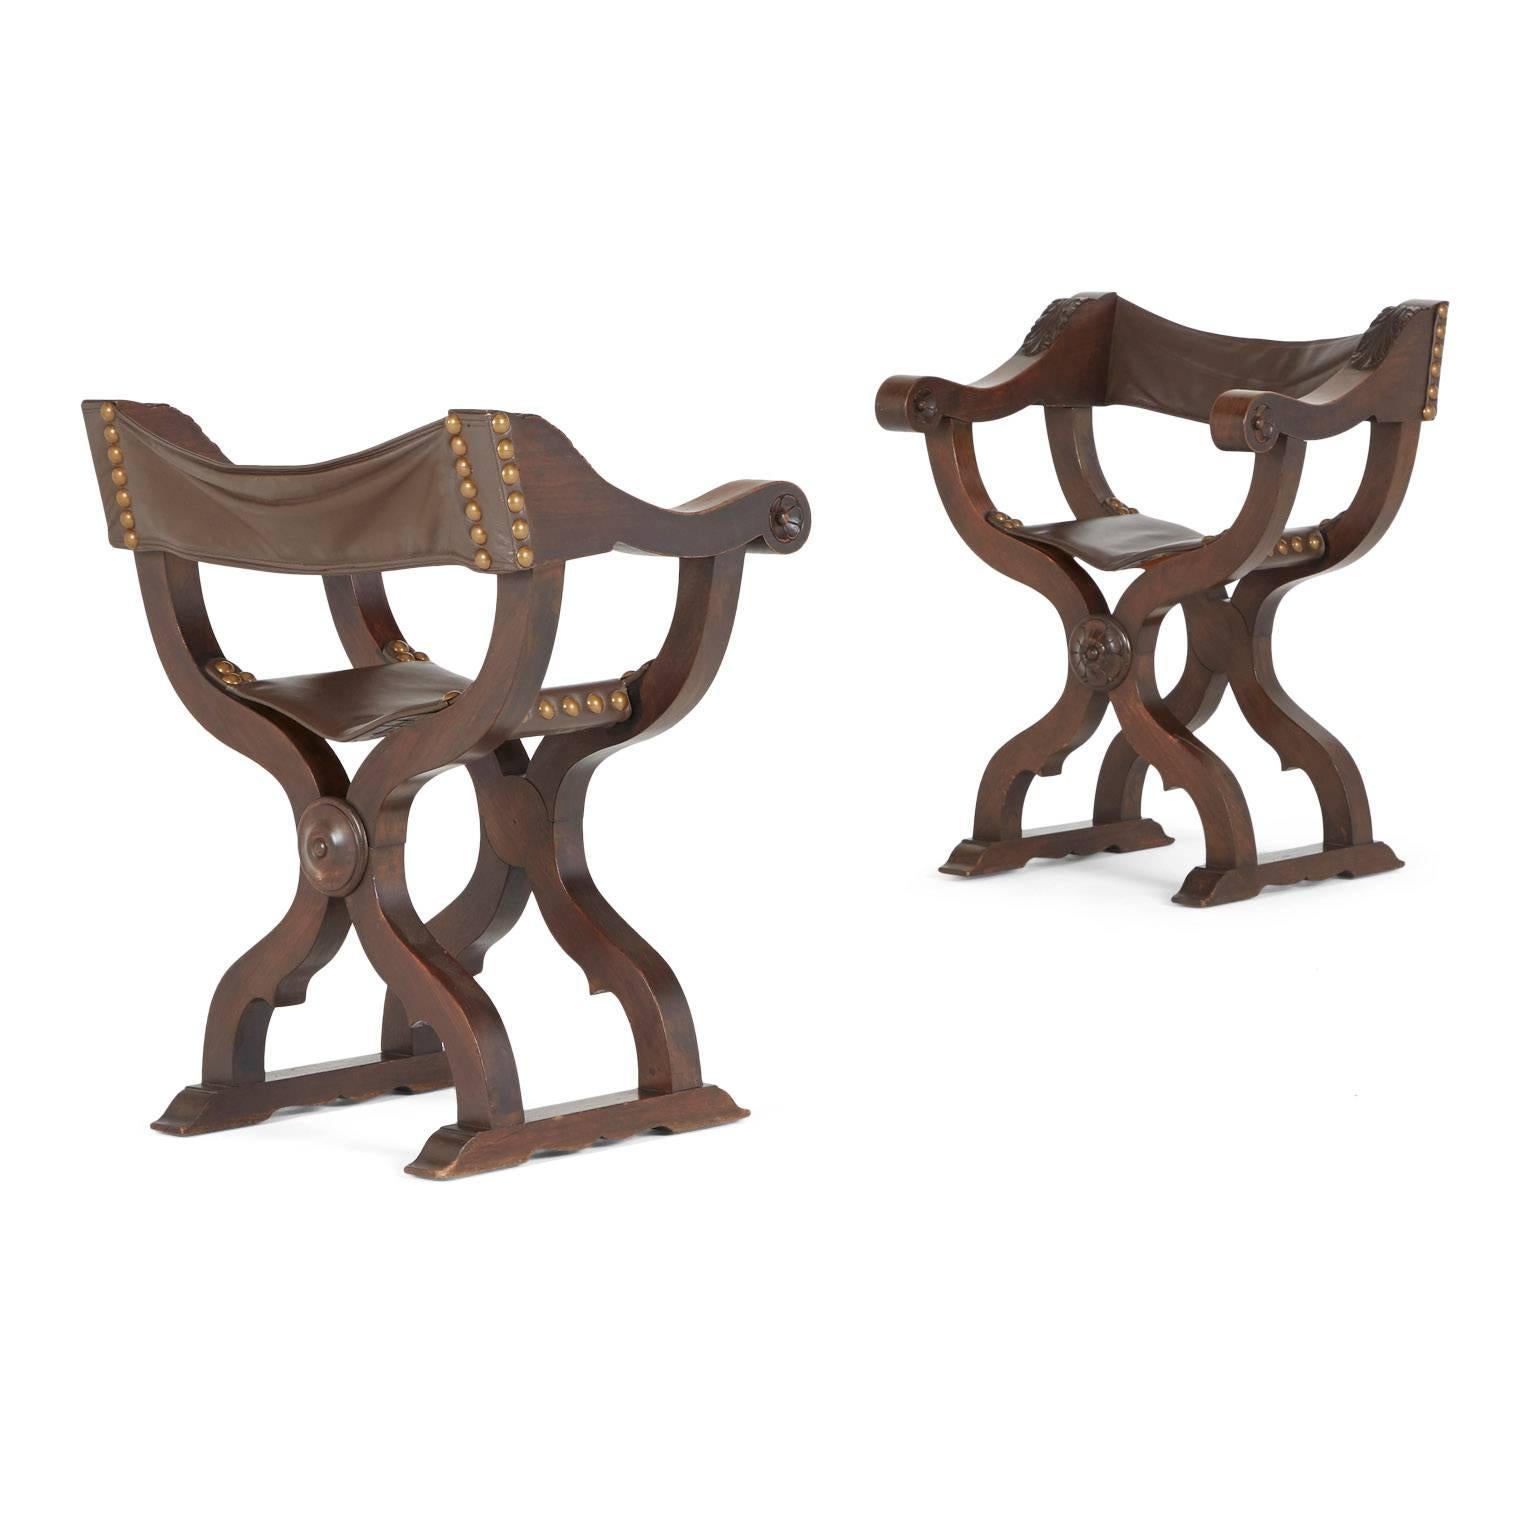 Pair of 19th century Italian hand-carved walnut Savonarola folding Campaign chairs, circa 1880. These chairs have been recently restored with rich brown leather and consist of scrolling arms, curule legs and sturdy brass nail-heads. The frame